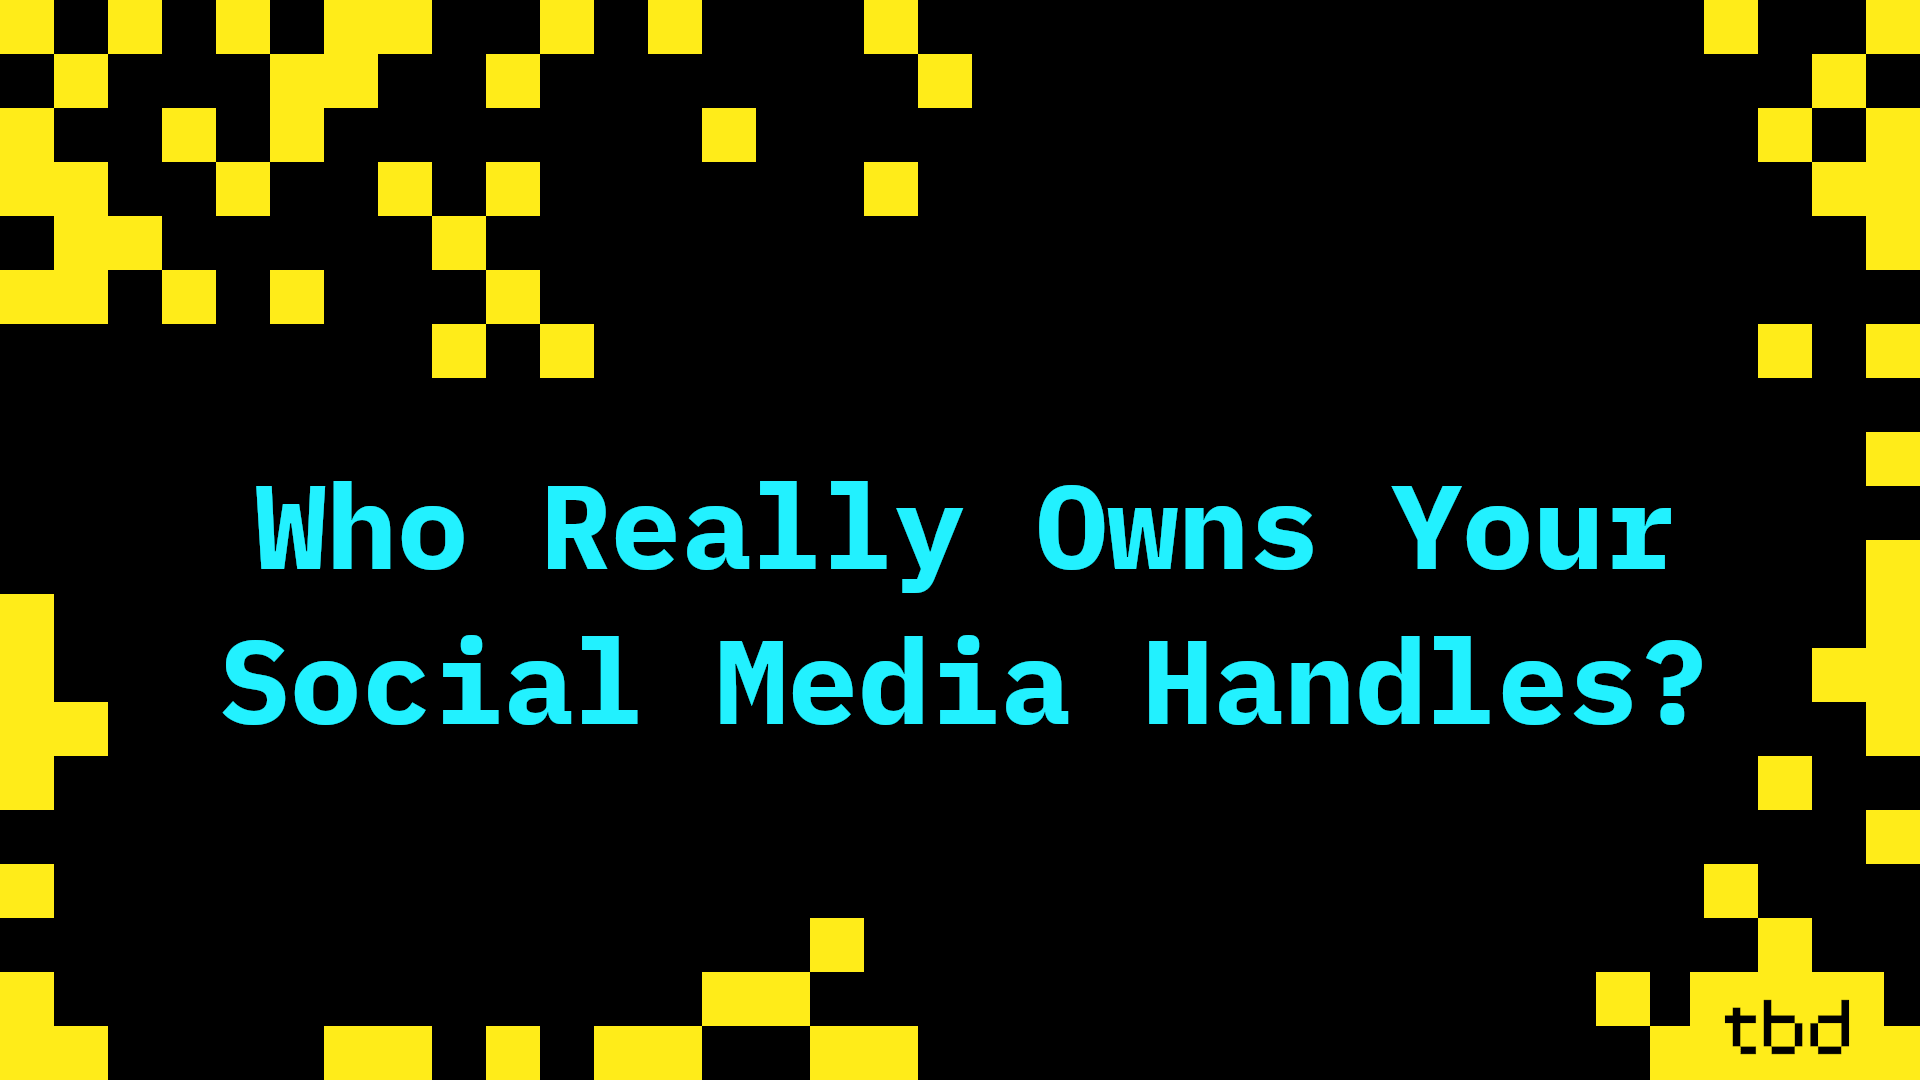 Who really owns your social media handles?